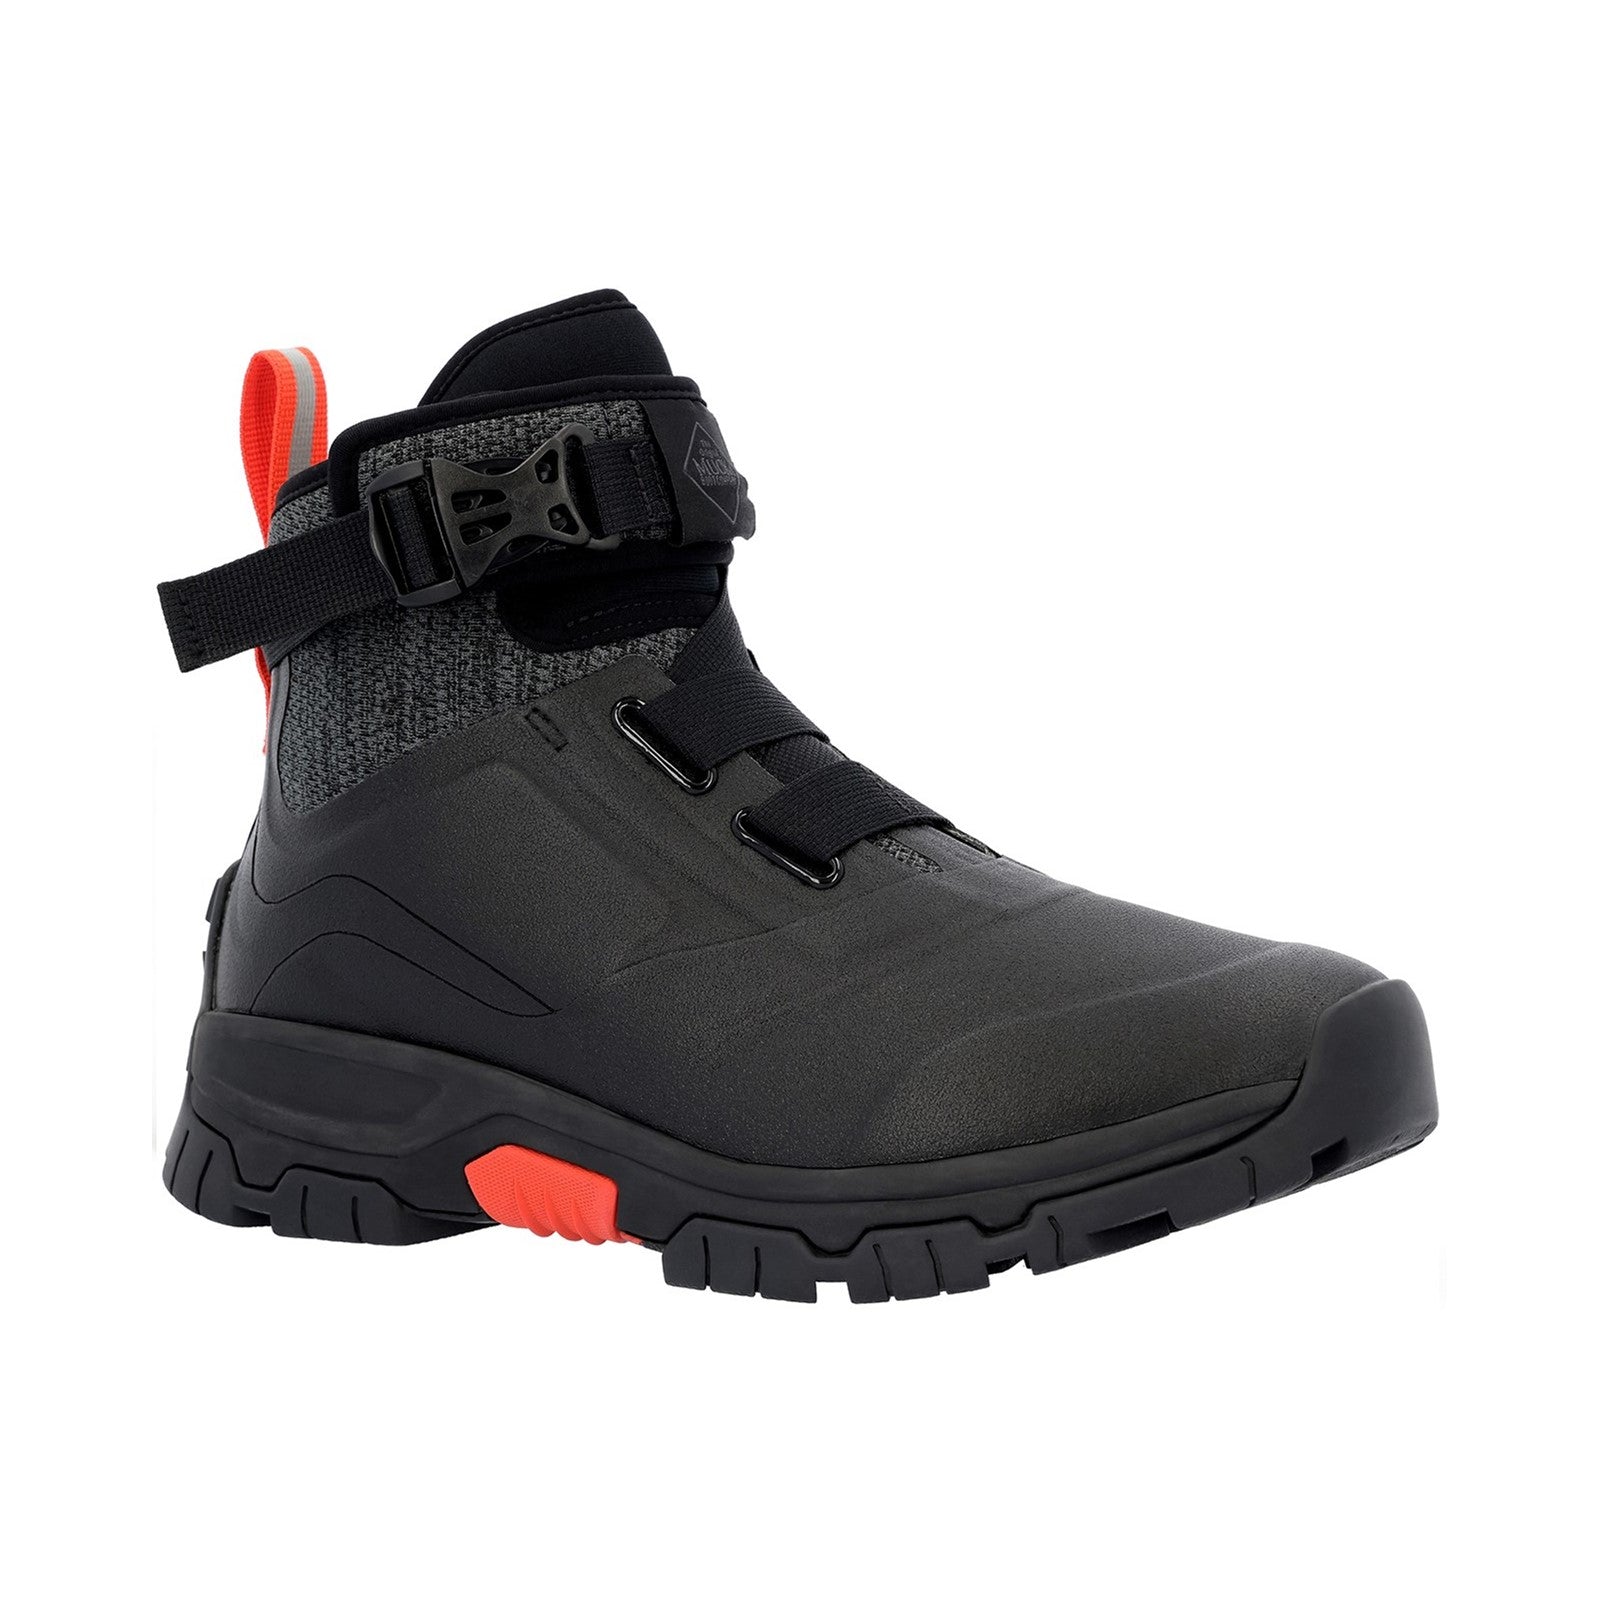 Muck Boots Apex Pac Mid Boot